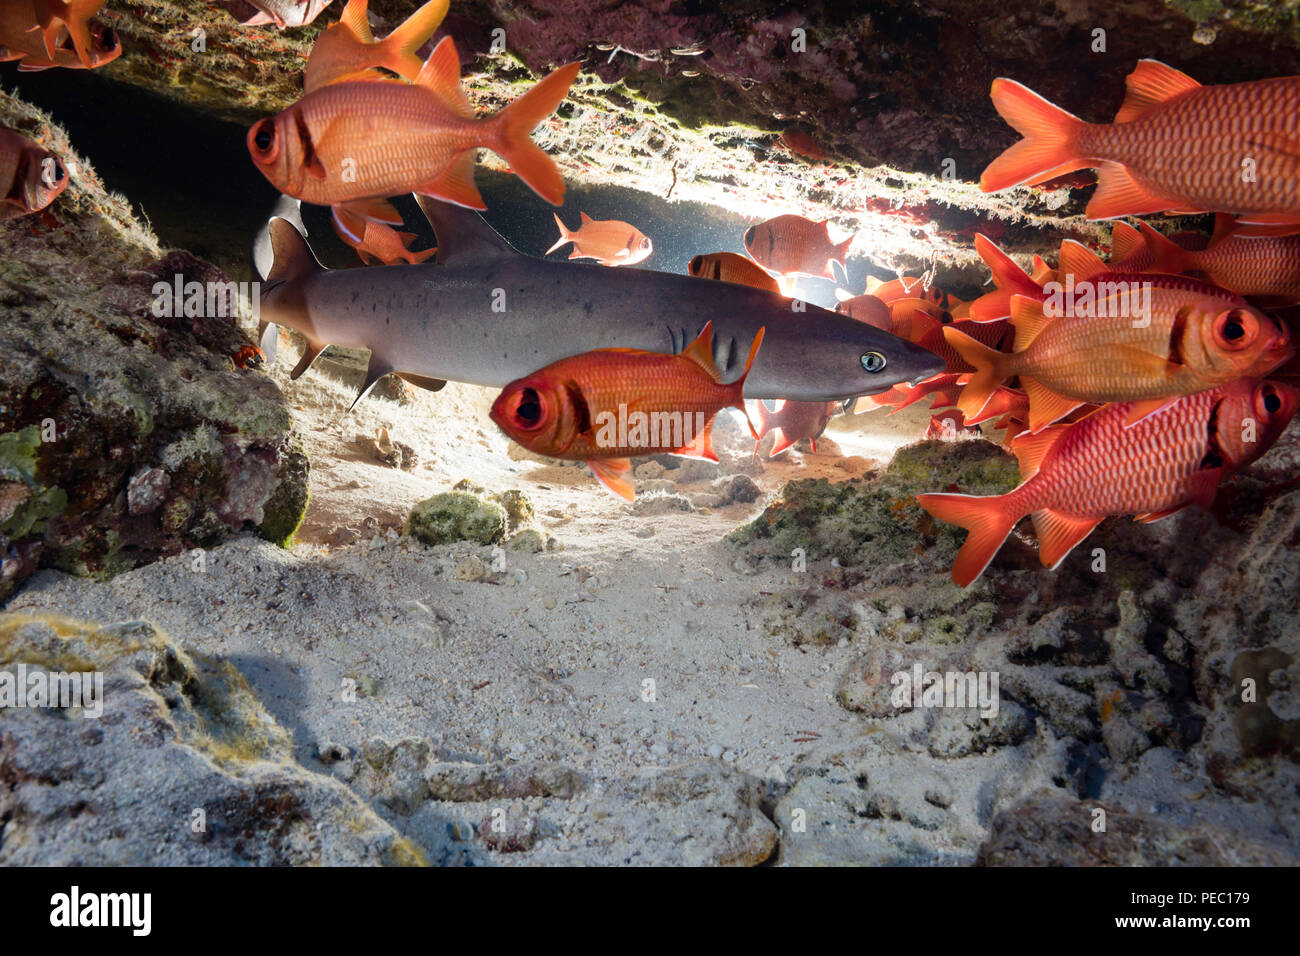 A young whitetip reef shark, Triaenodon obesus, shares a crevice with a school of bigscale soldierfish, Myripristis berndti, Hawaii. Stock Photo